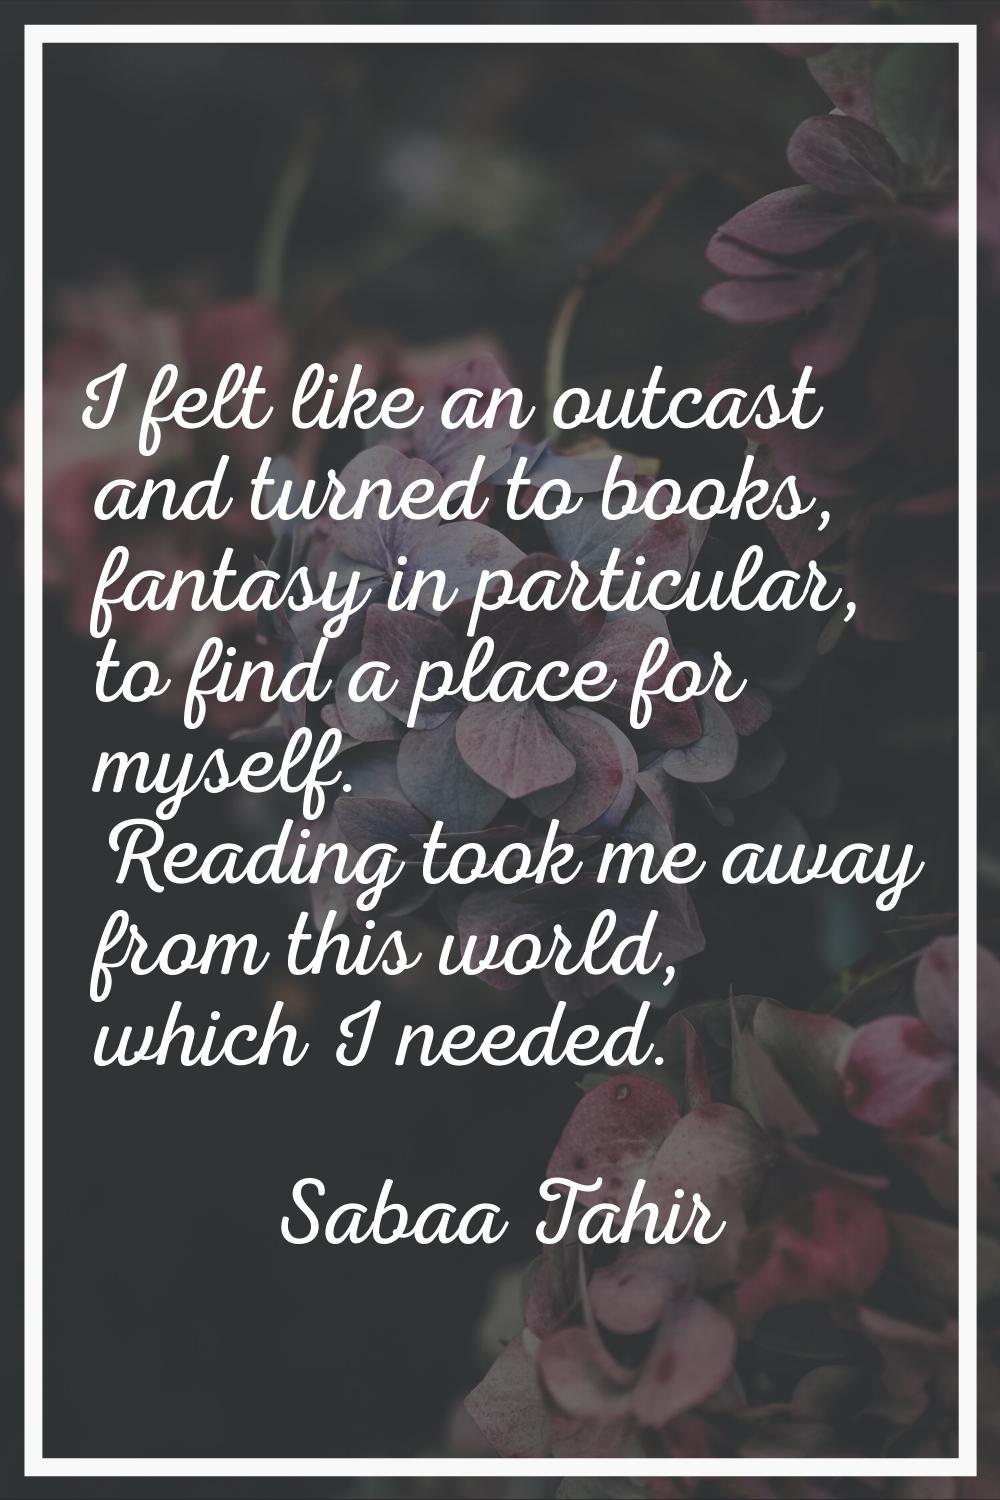 I felt like an outcast and turned to books, fantasy in particular, to find a place for myself. Read